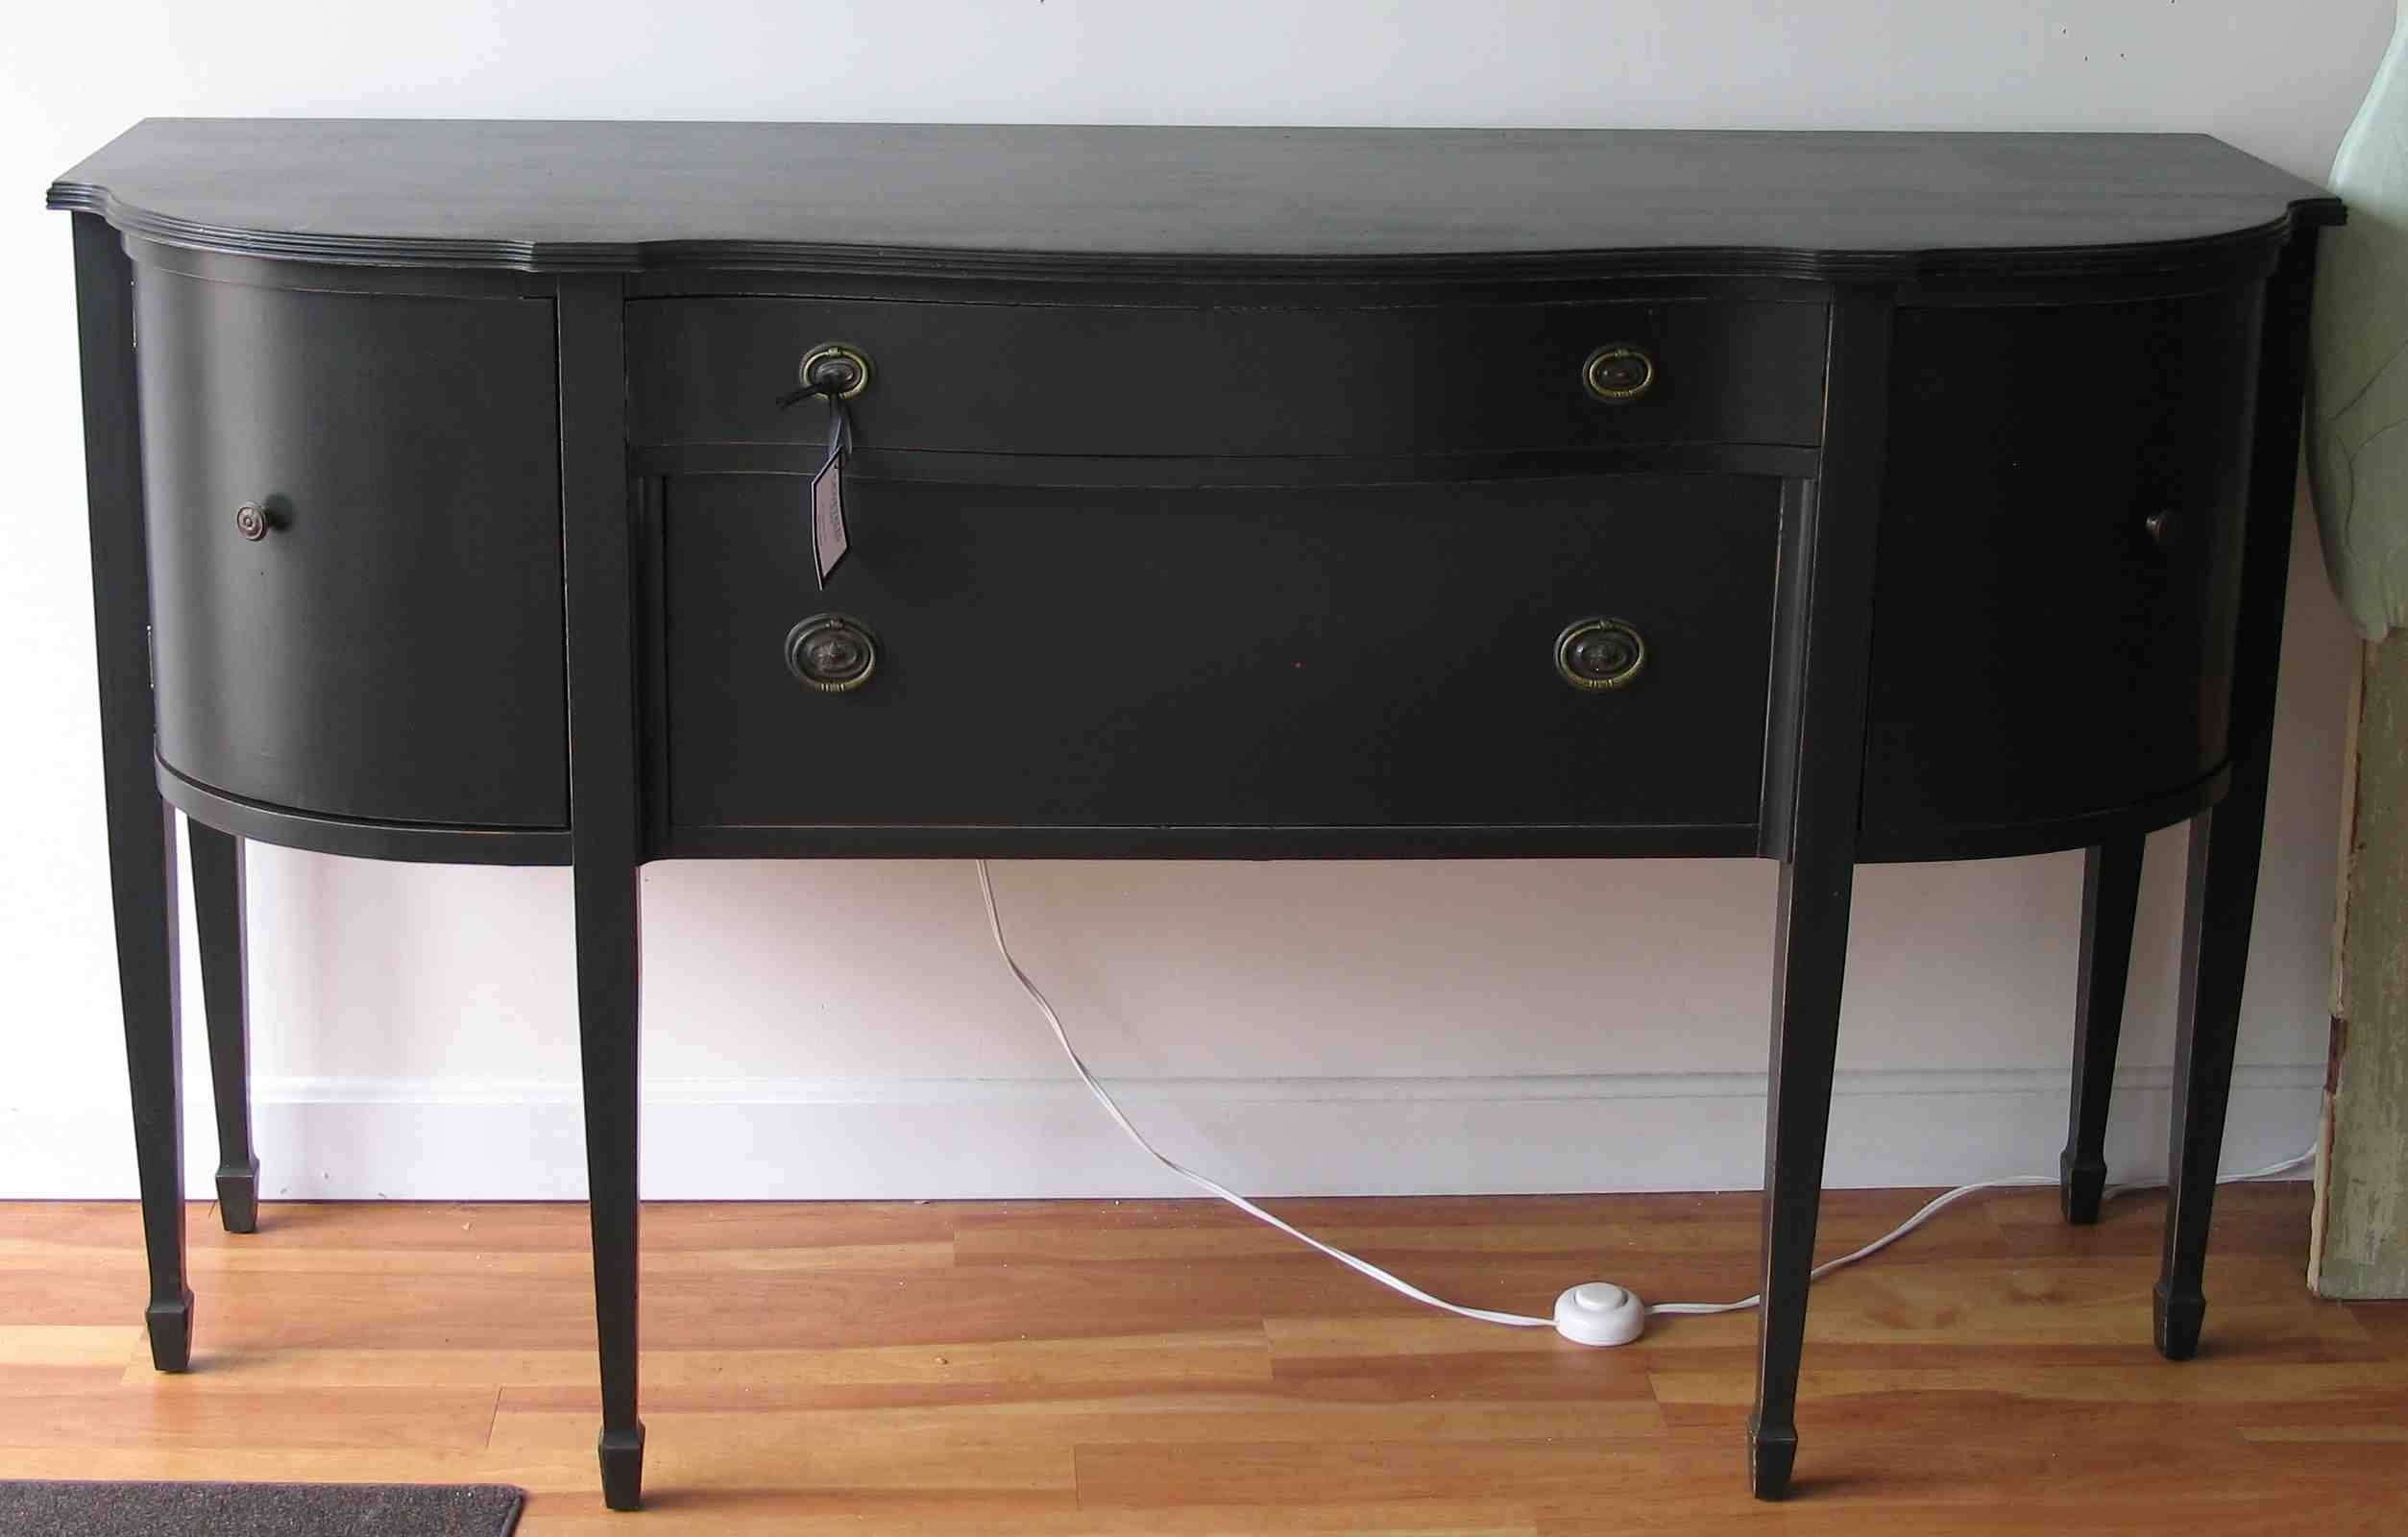 Semi Oval Black Wooden Table With Storage And Drawers Plus Long Intended For Black Sideboard Cabinets (View 12 of 15)